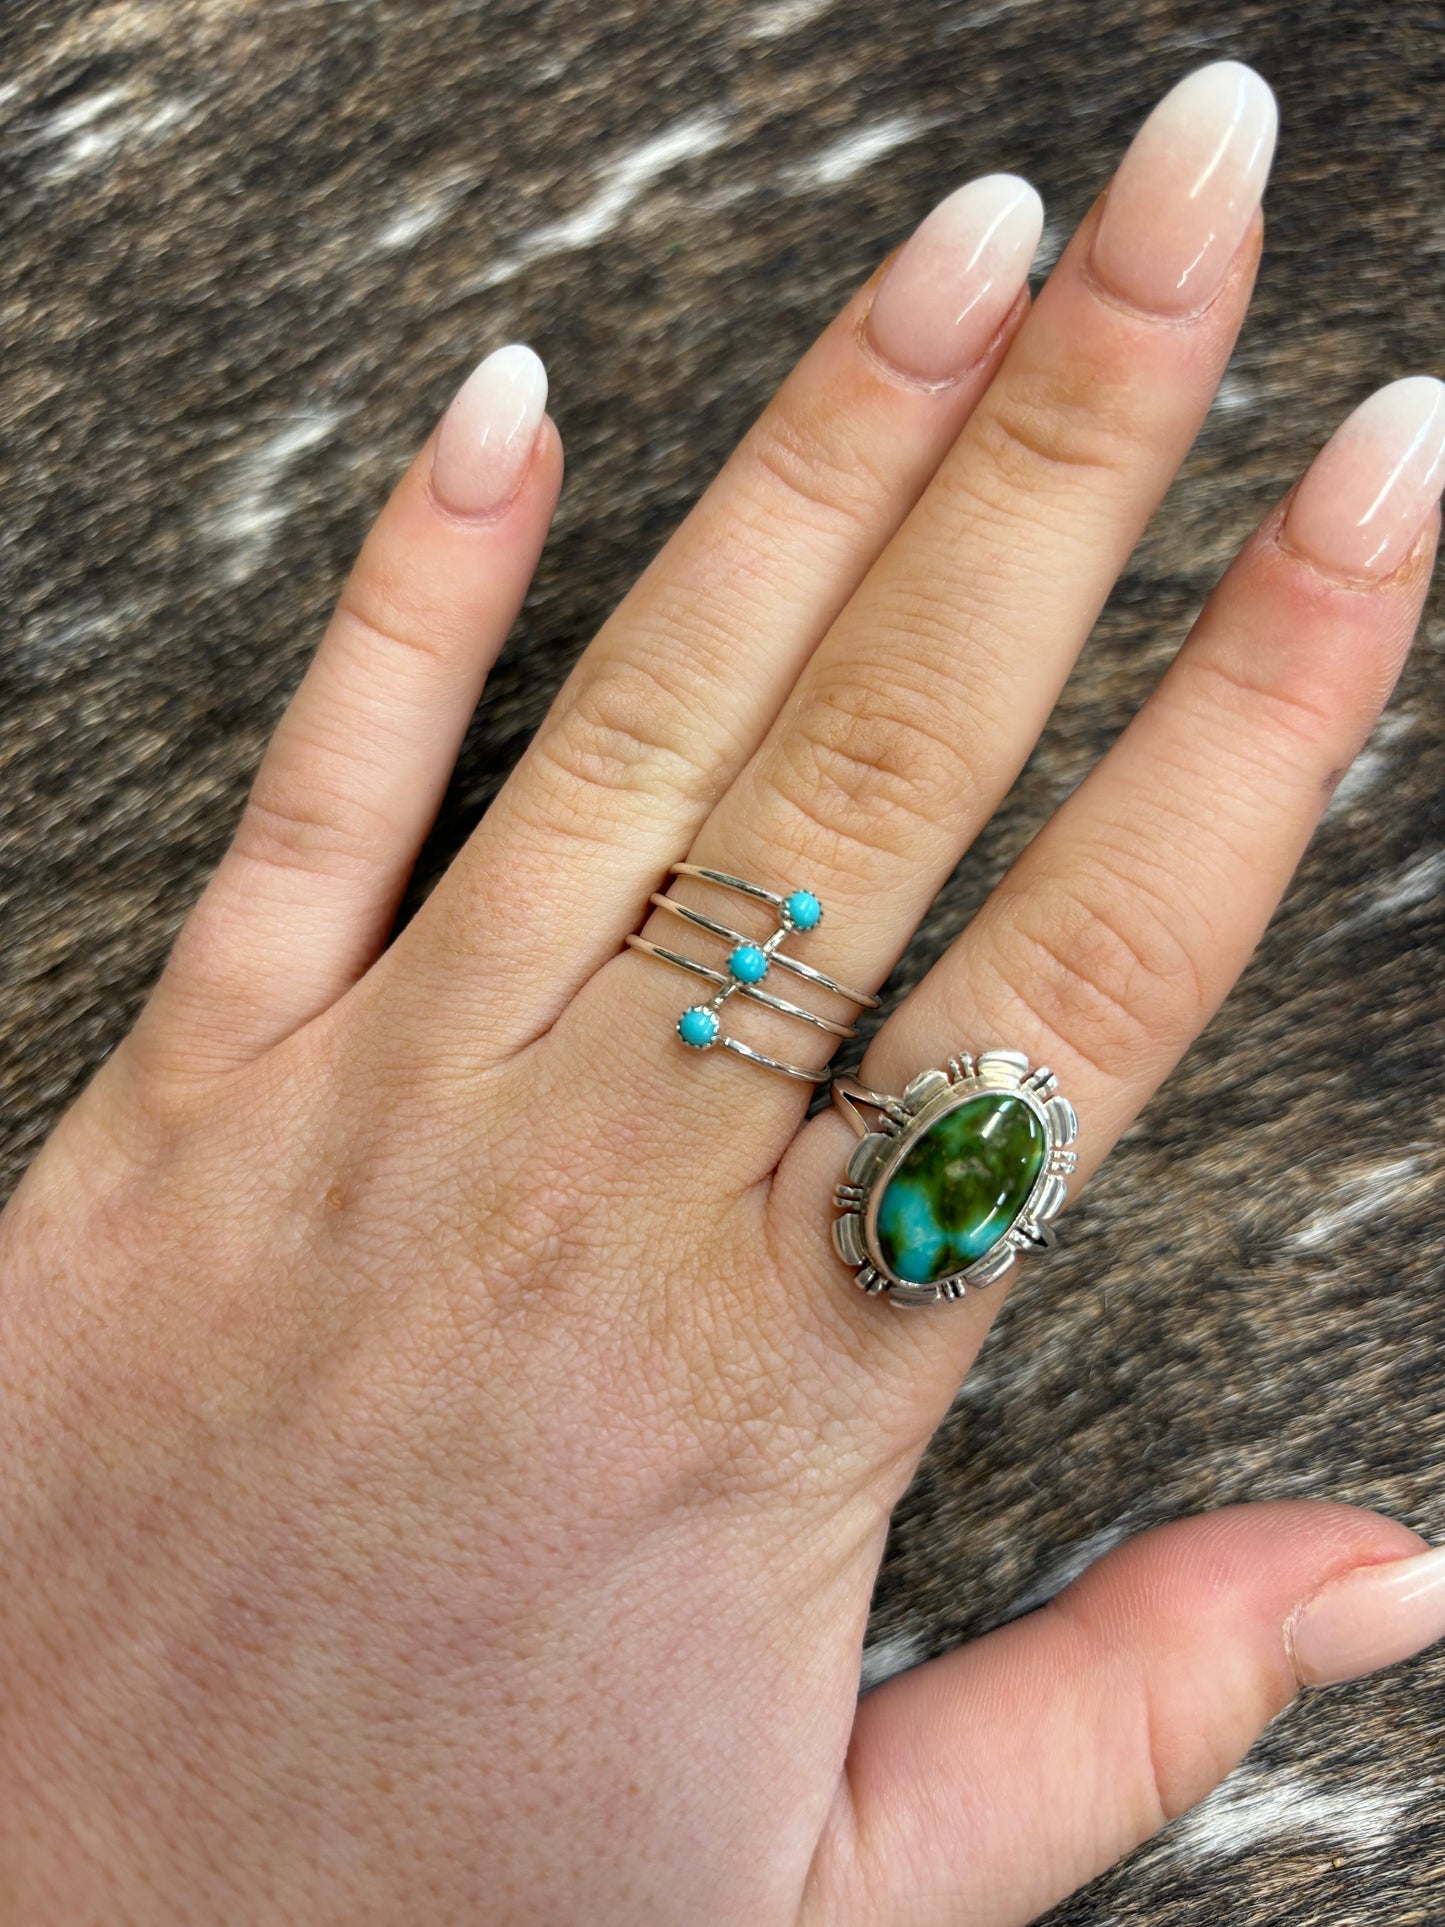 The Triple Stone Turquoise Ring - size 7